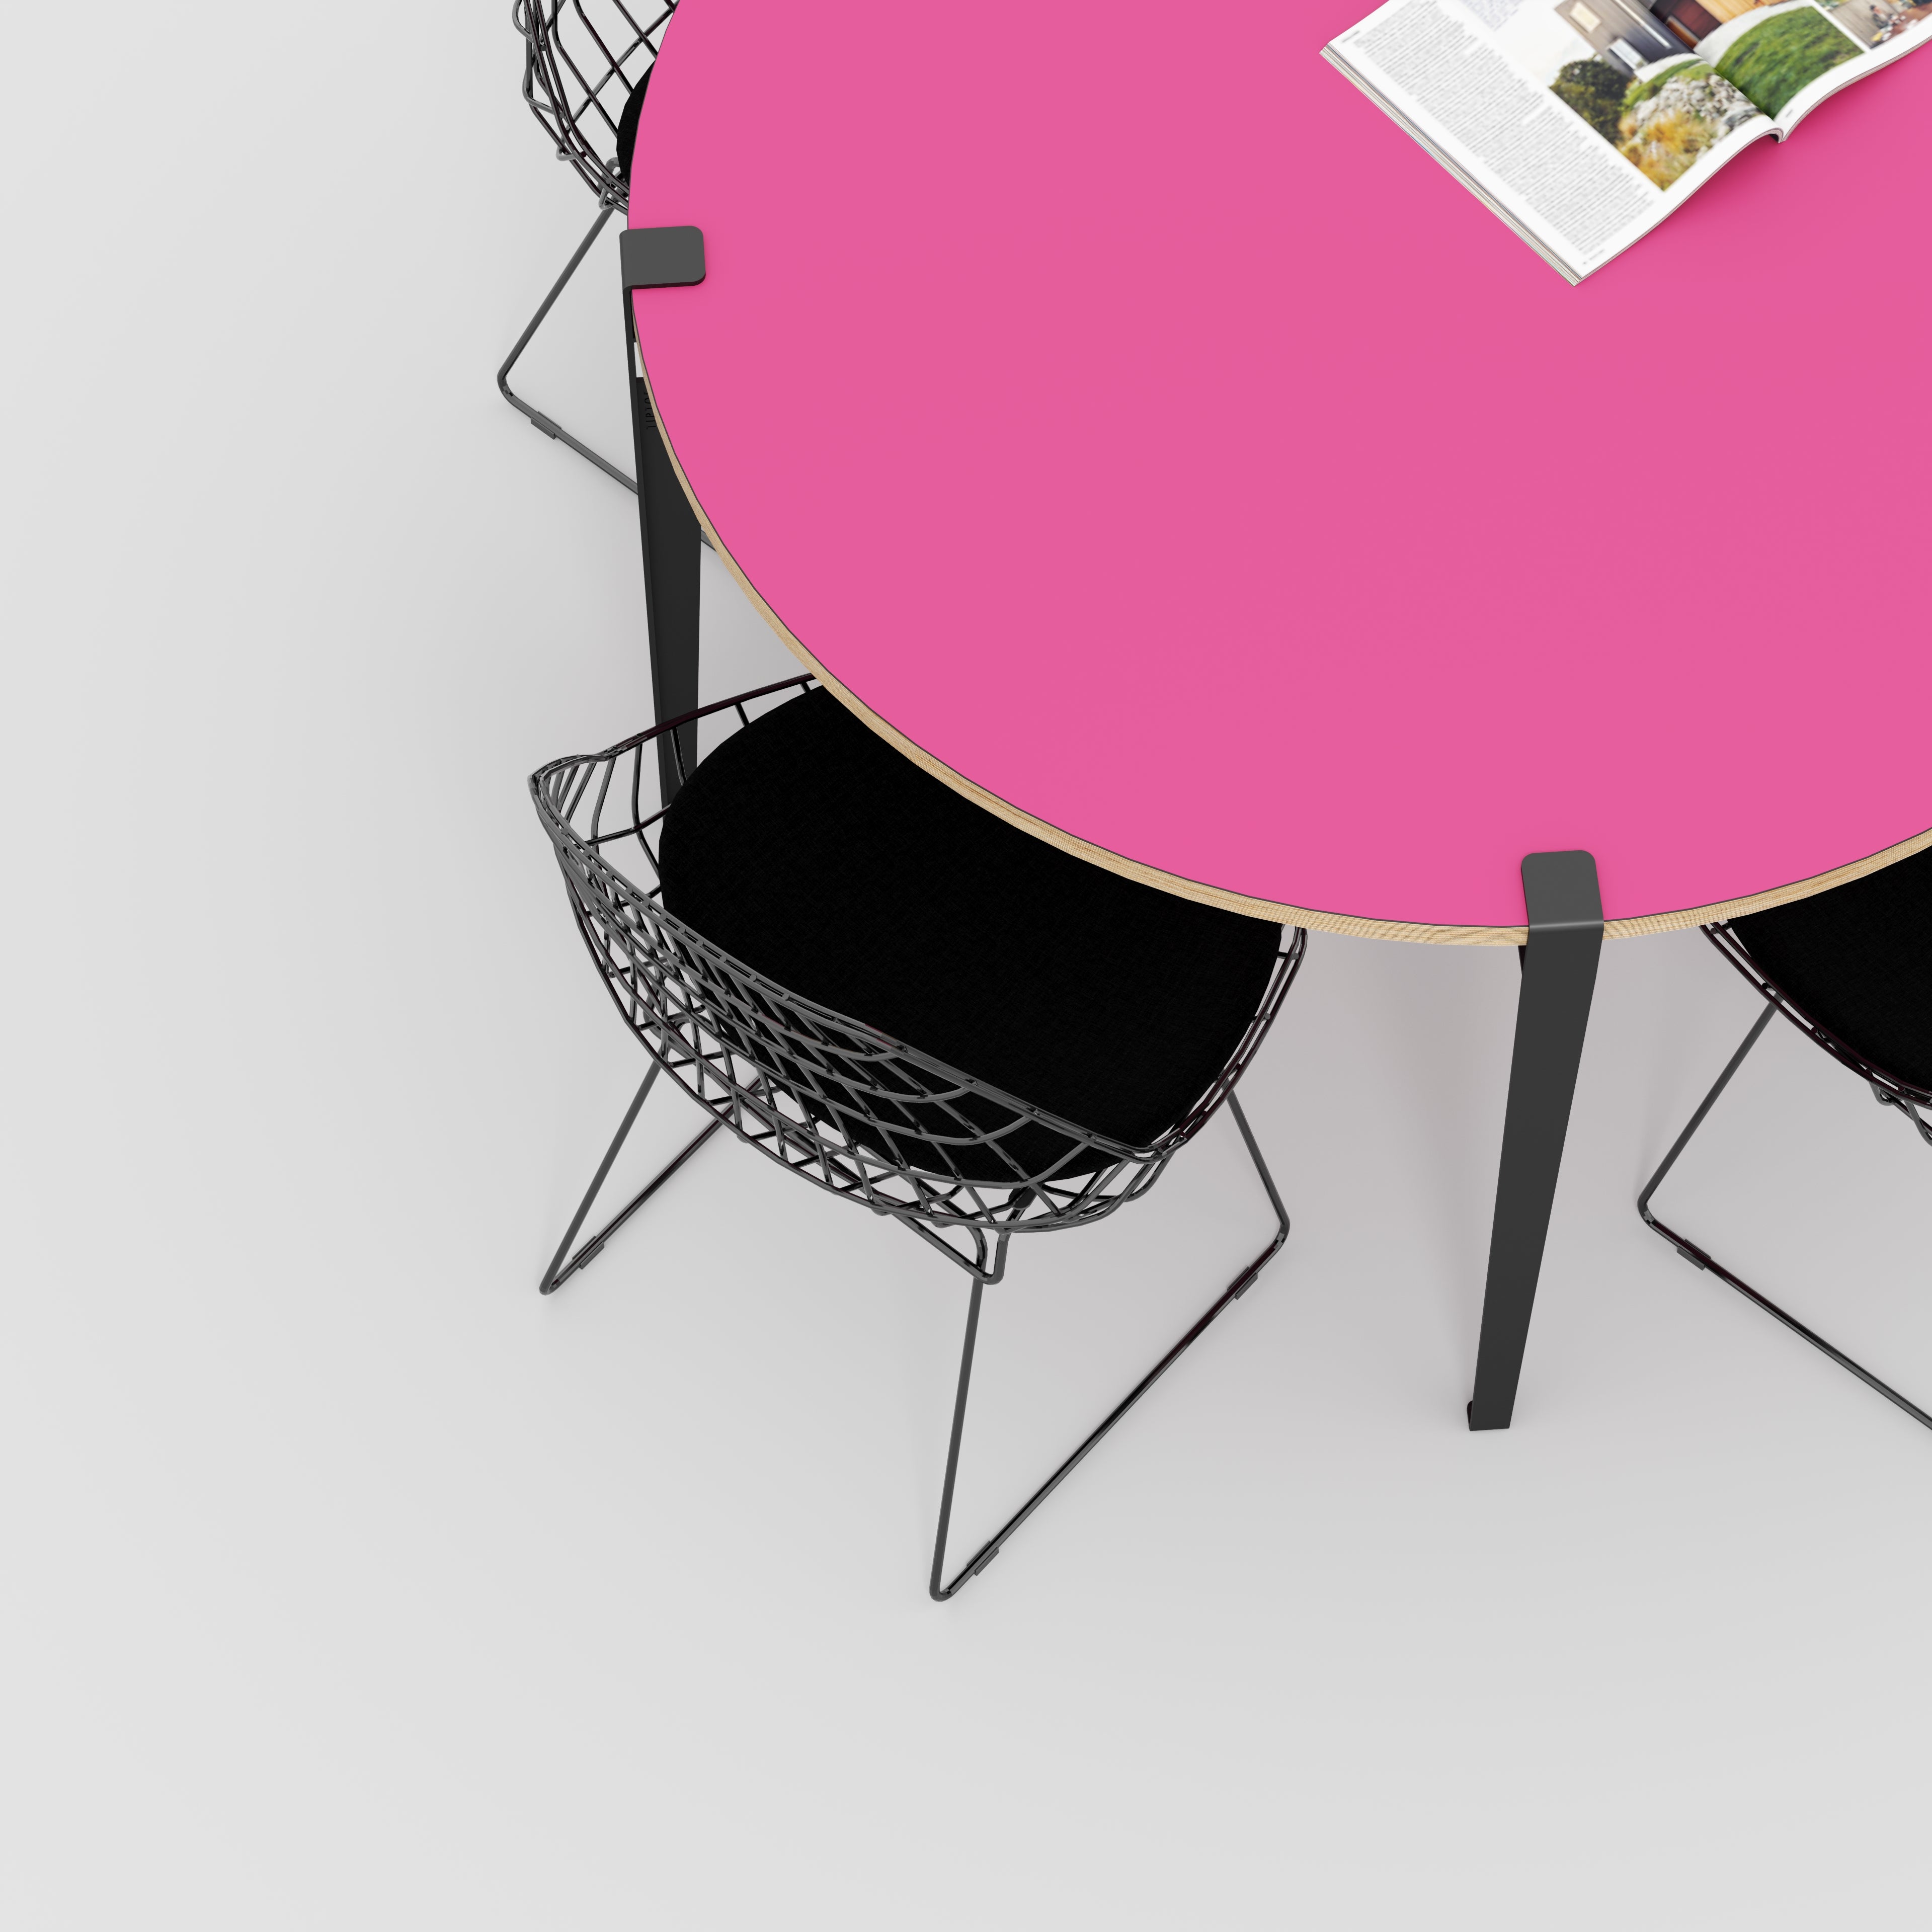 Round Table with Black Tiptoe Legs - Formica Juicy Pink - 1200(dia) x 750(h)